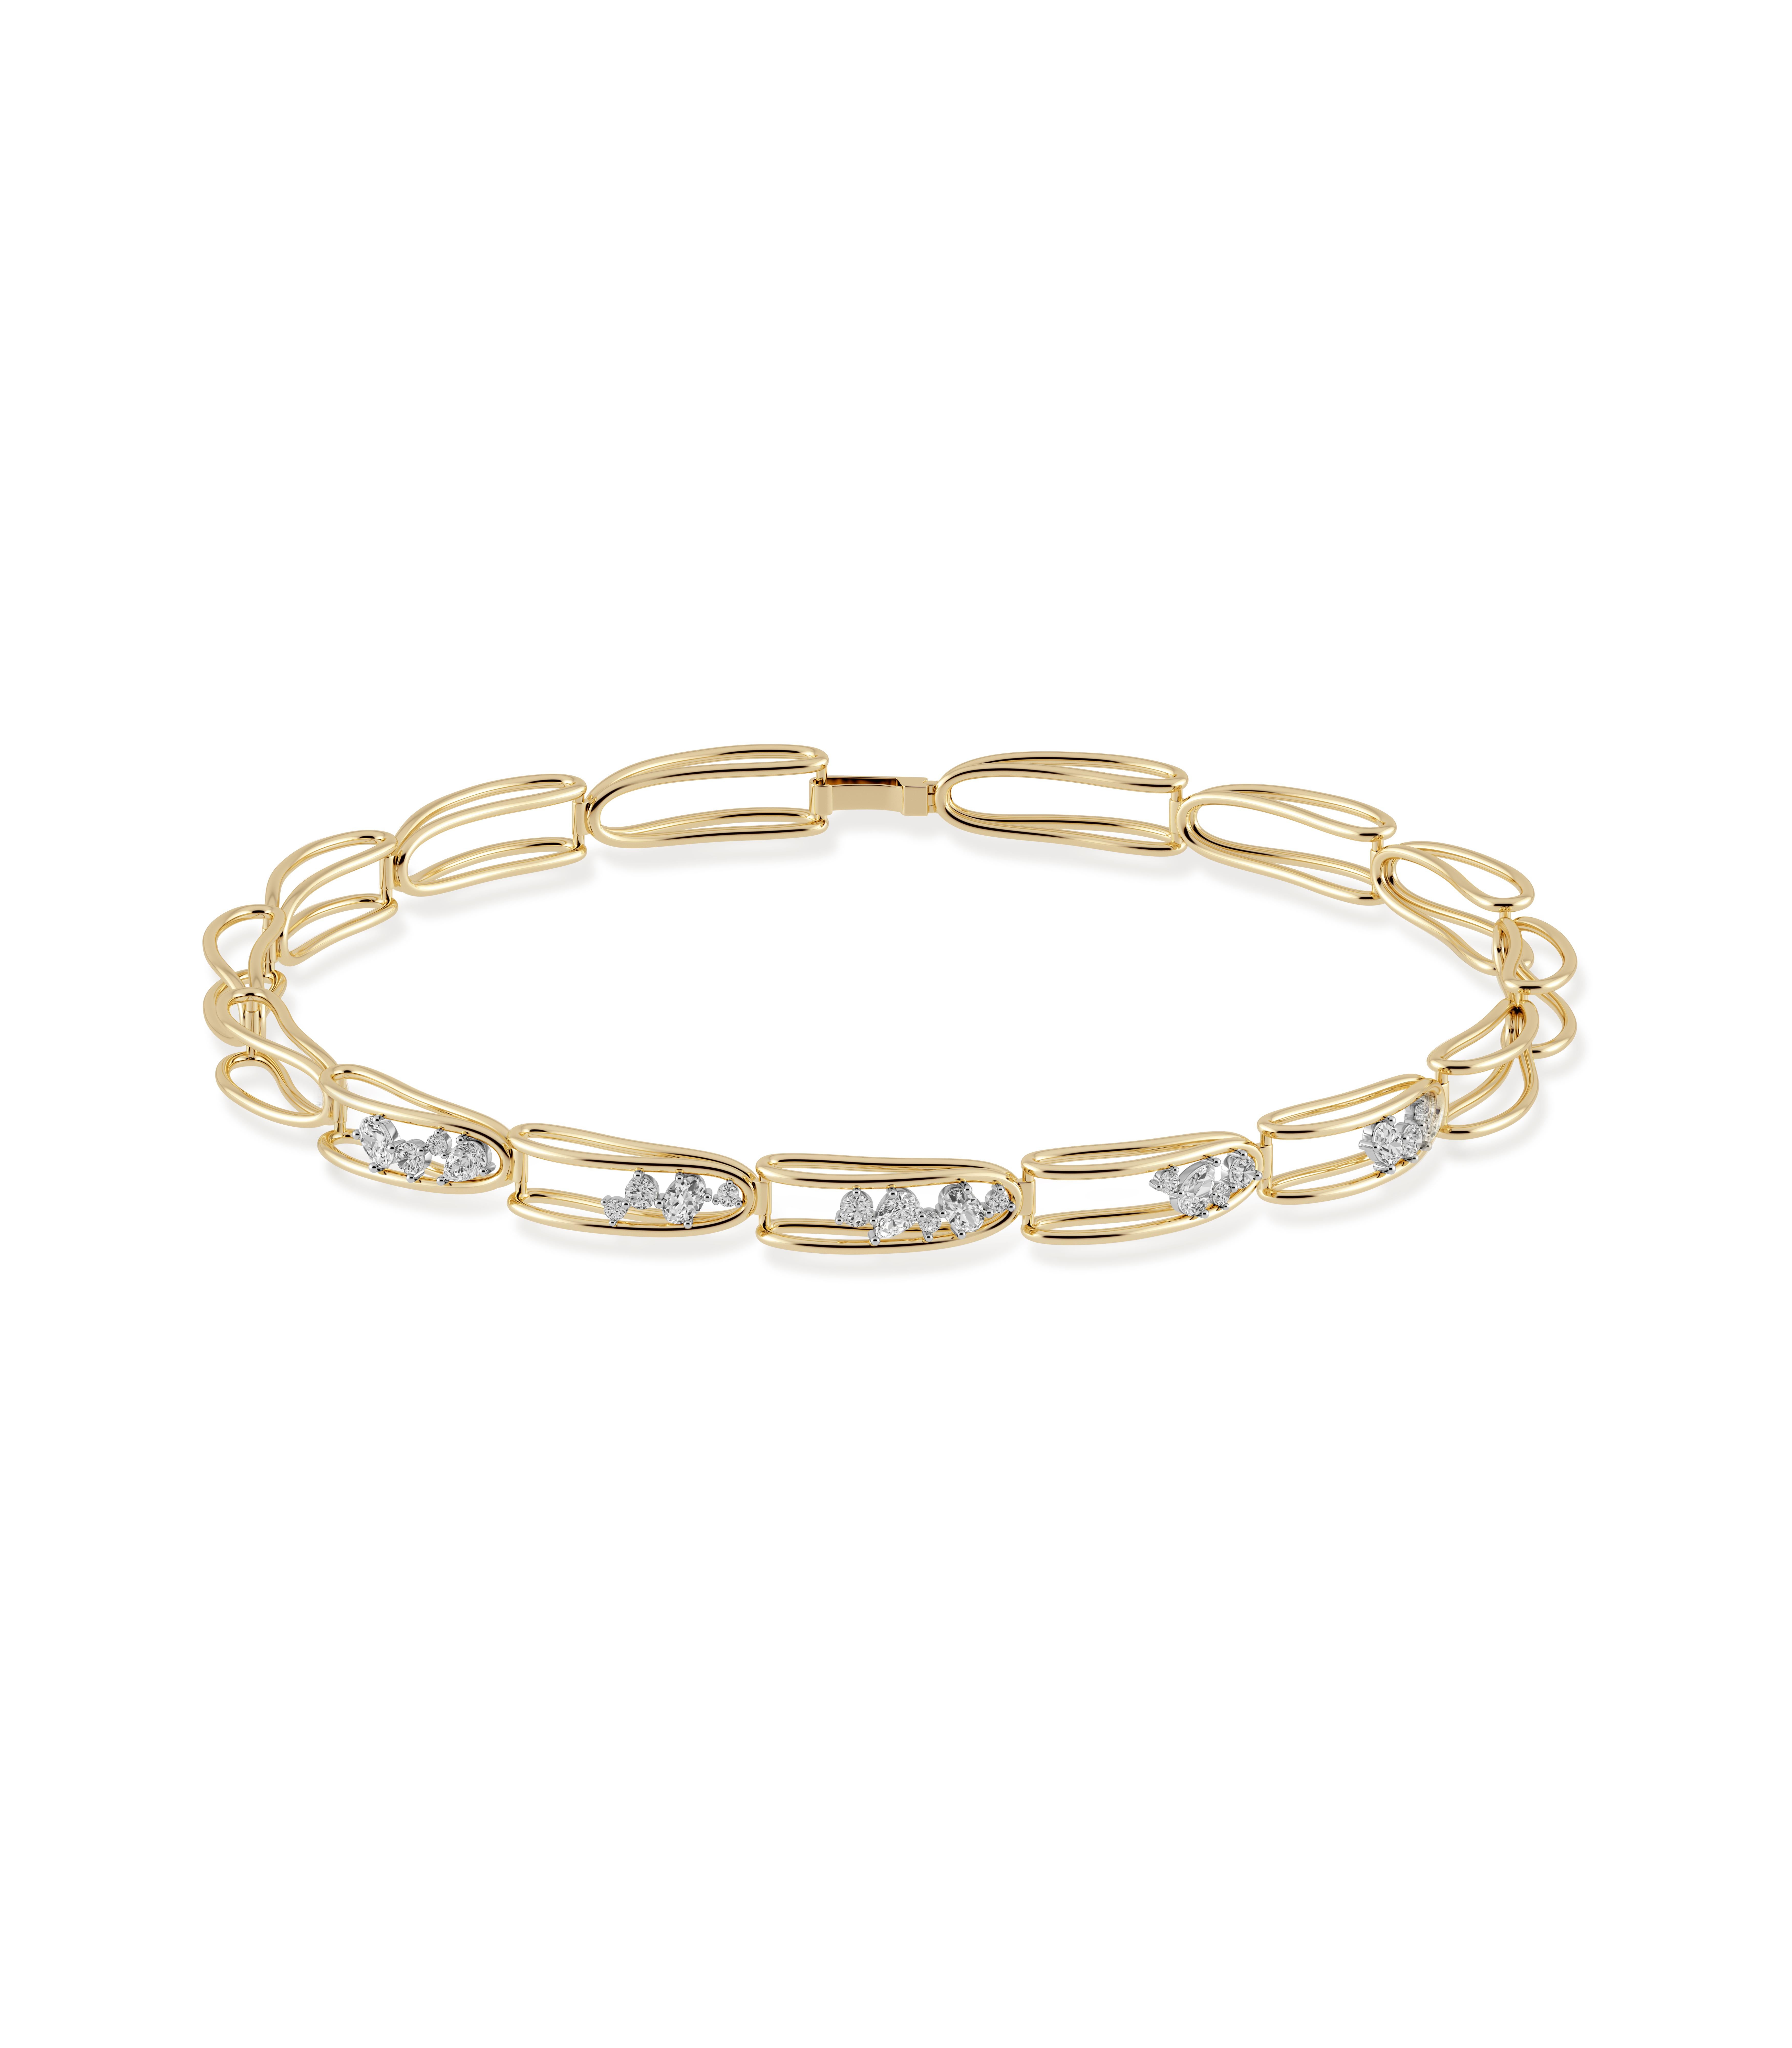 Our Mara Folded Links Choker is made in 18K gold with varying sized round, pear and oval shaped natural diamonds set in platinum. Featuring five asymmetrical diamond filled links. 

The Mara Collection was built around the beauty of negative space